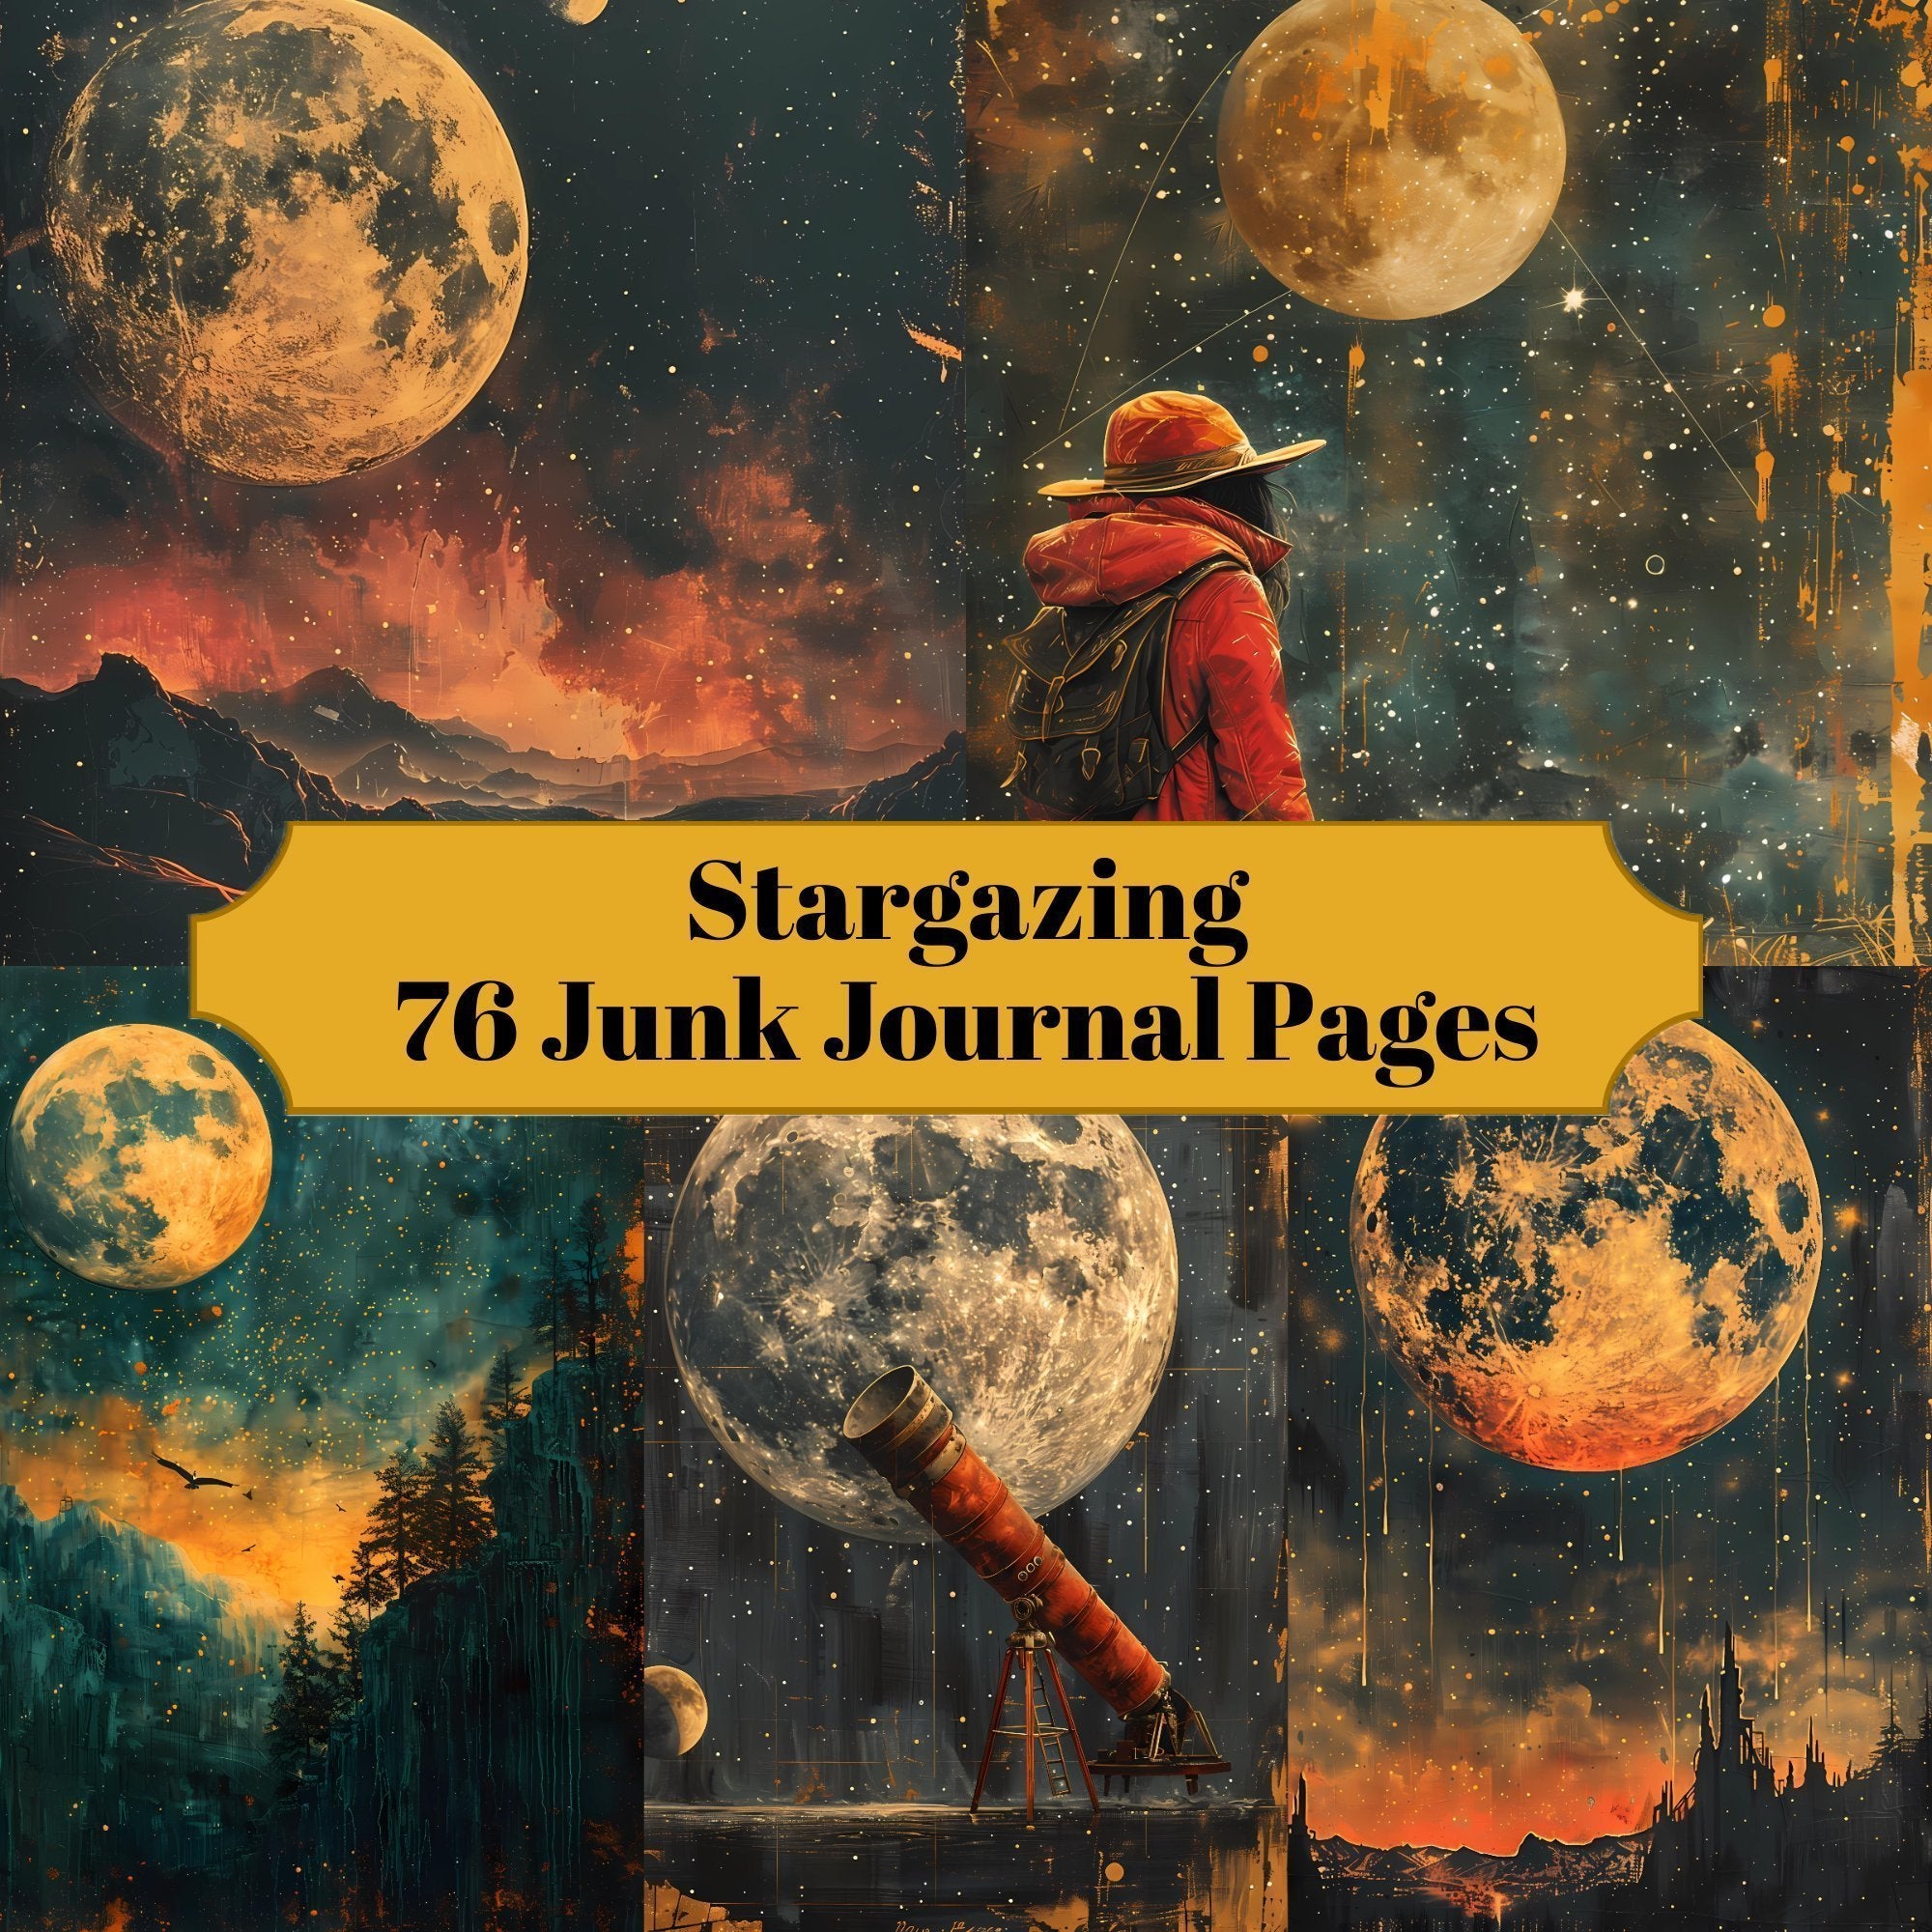 Stargazing Junk Journal Pages